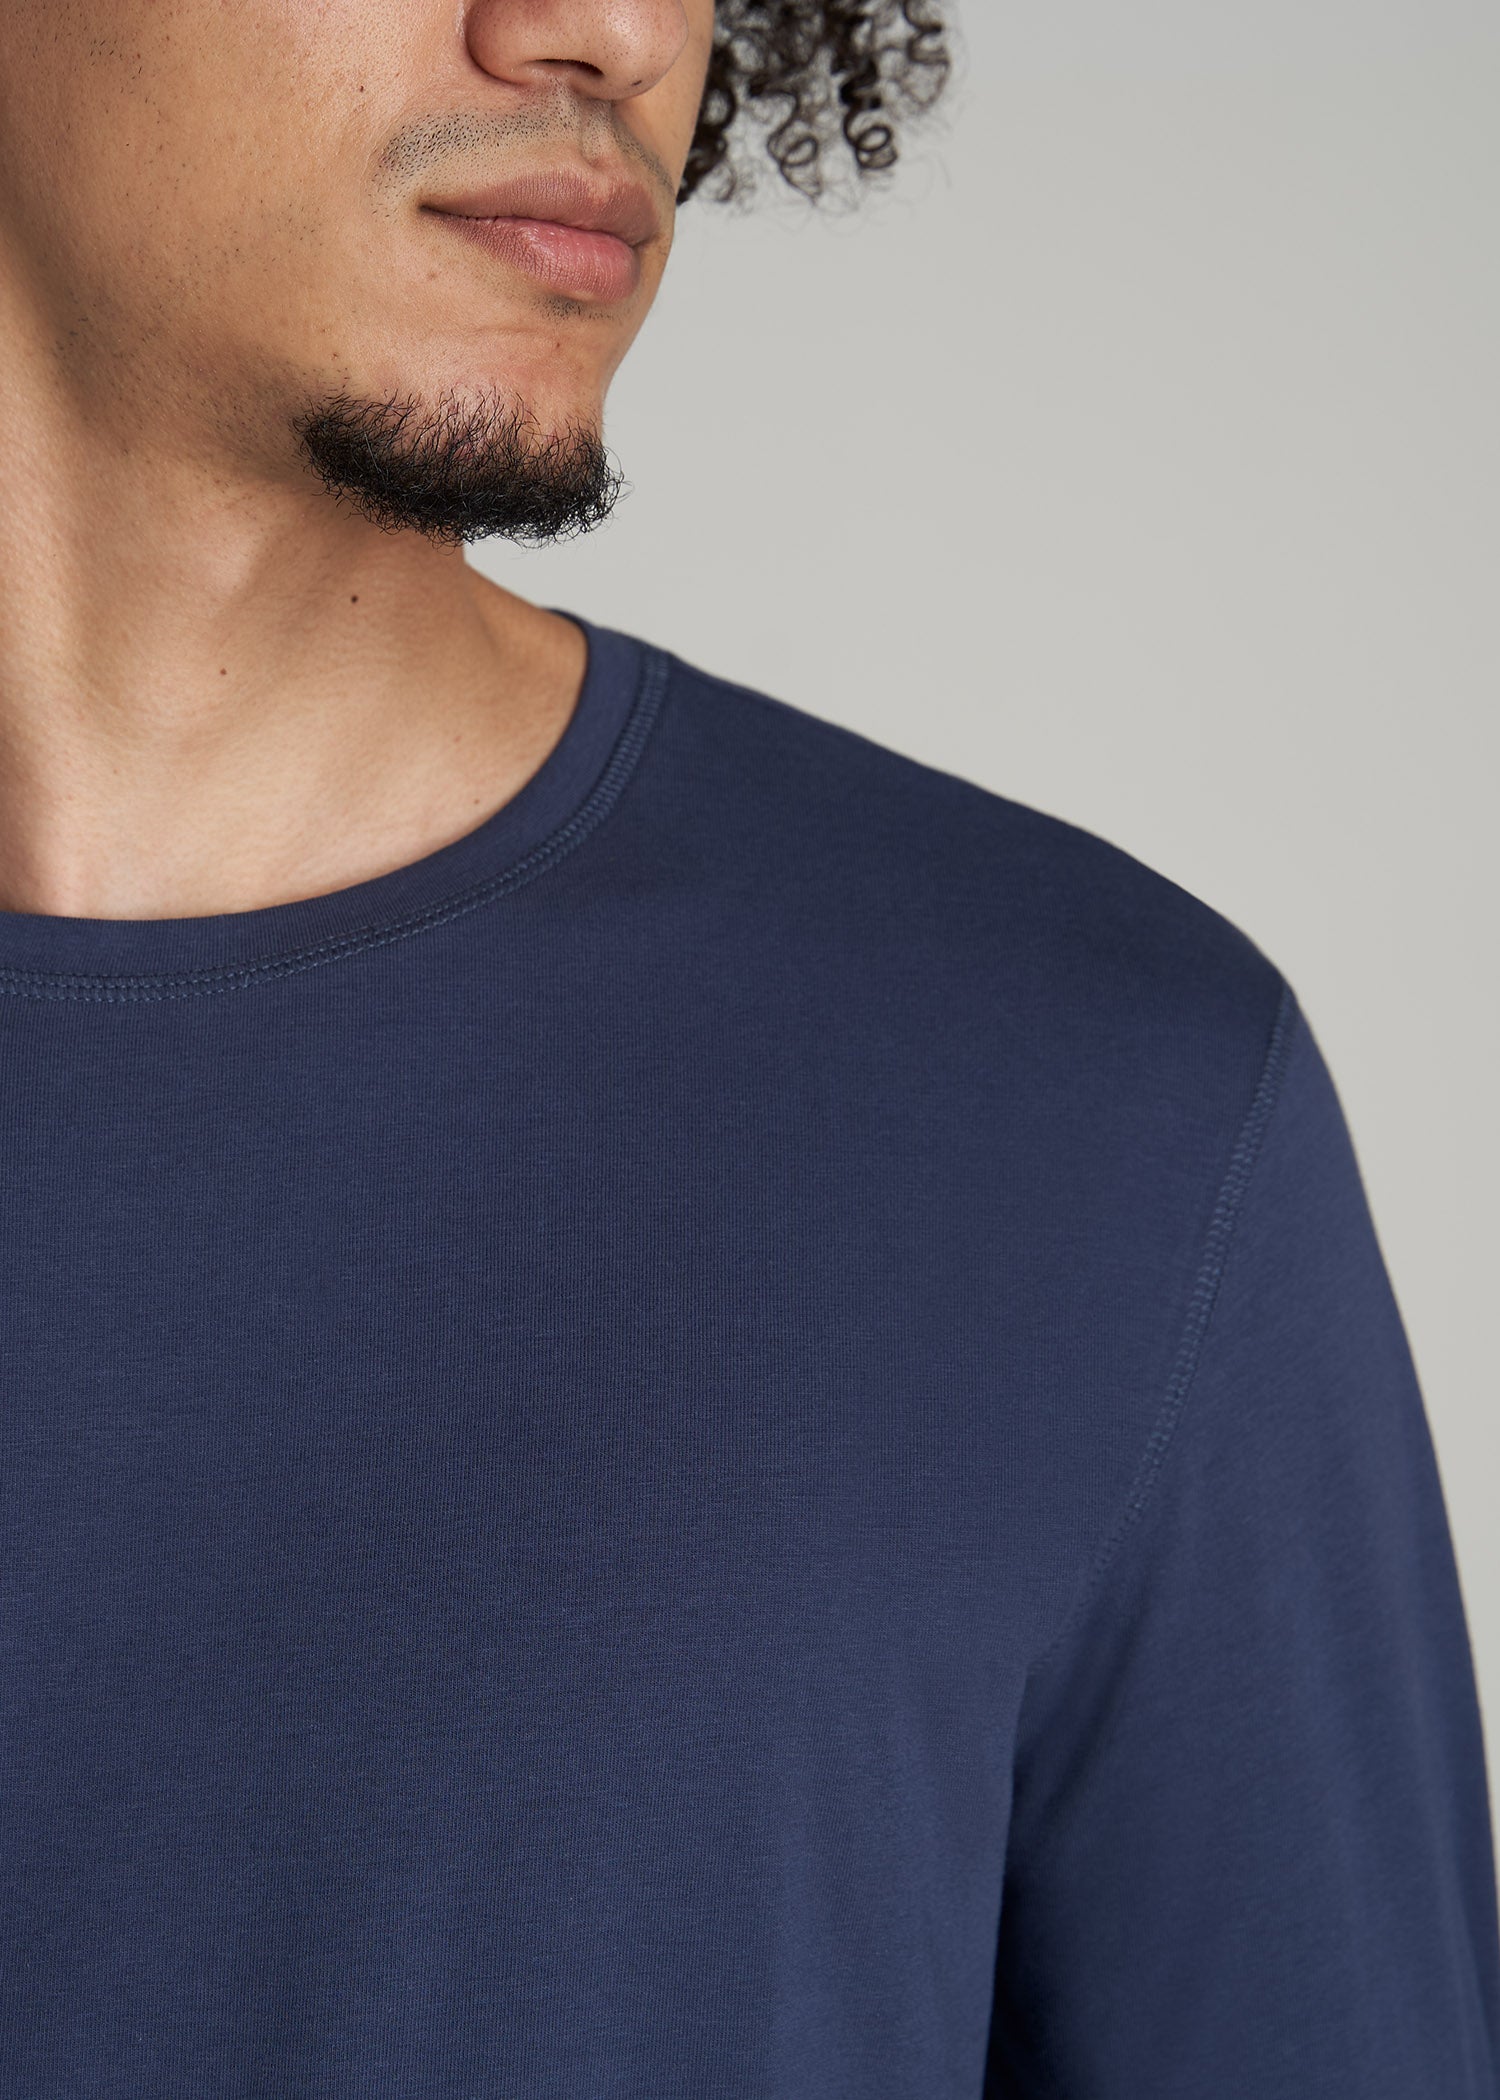 Tailored Fit Long Sleeve Shirt Navy